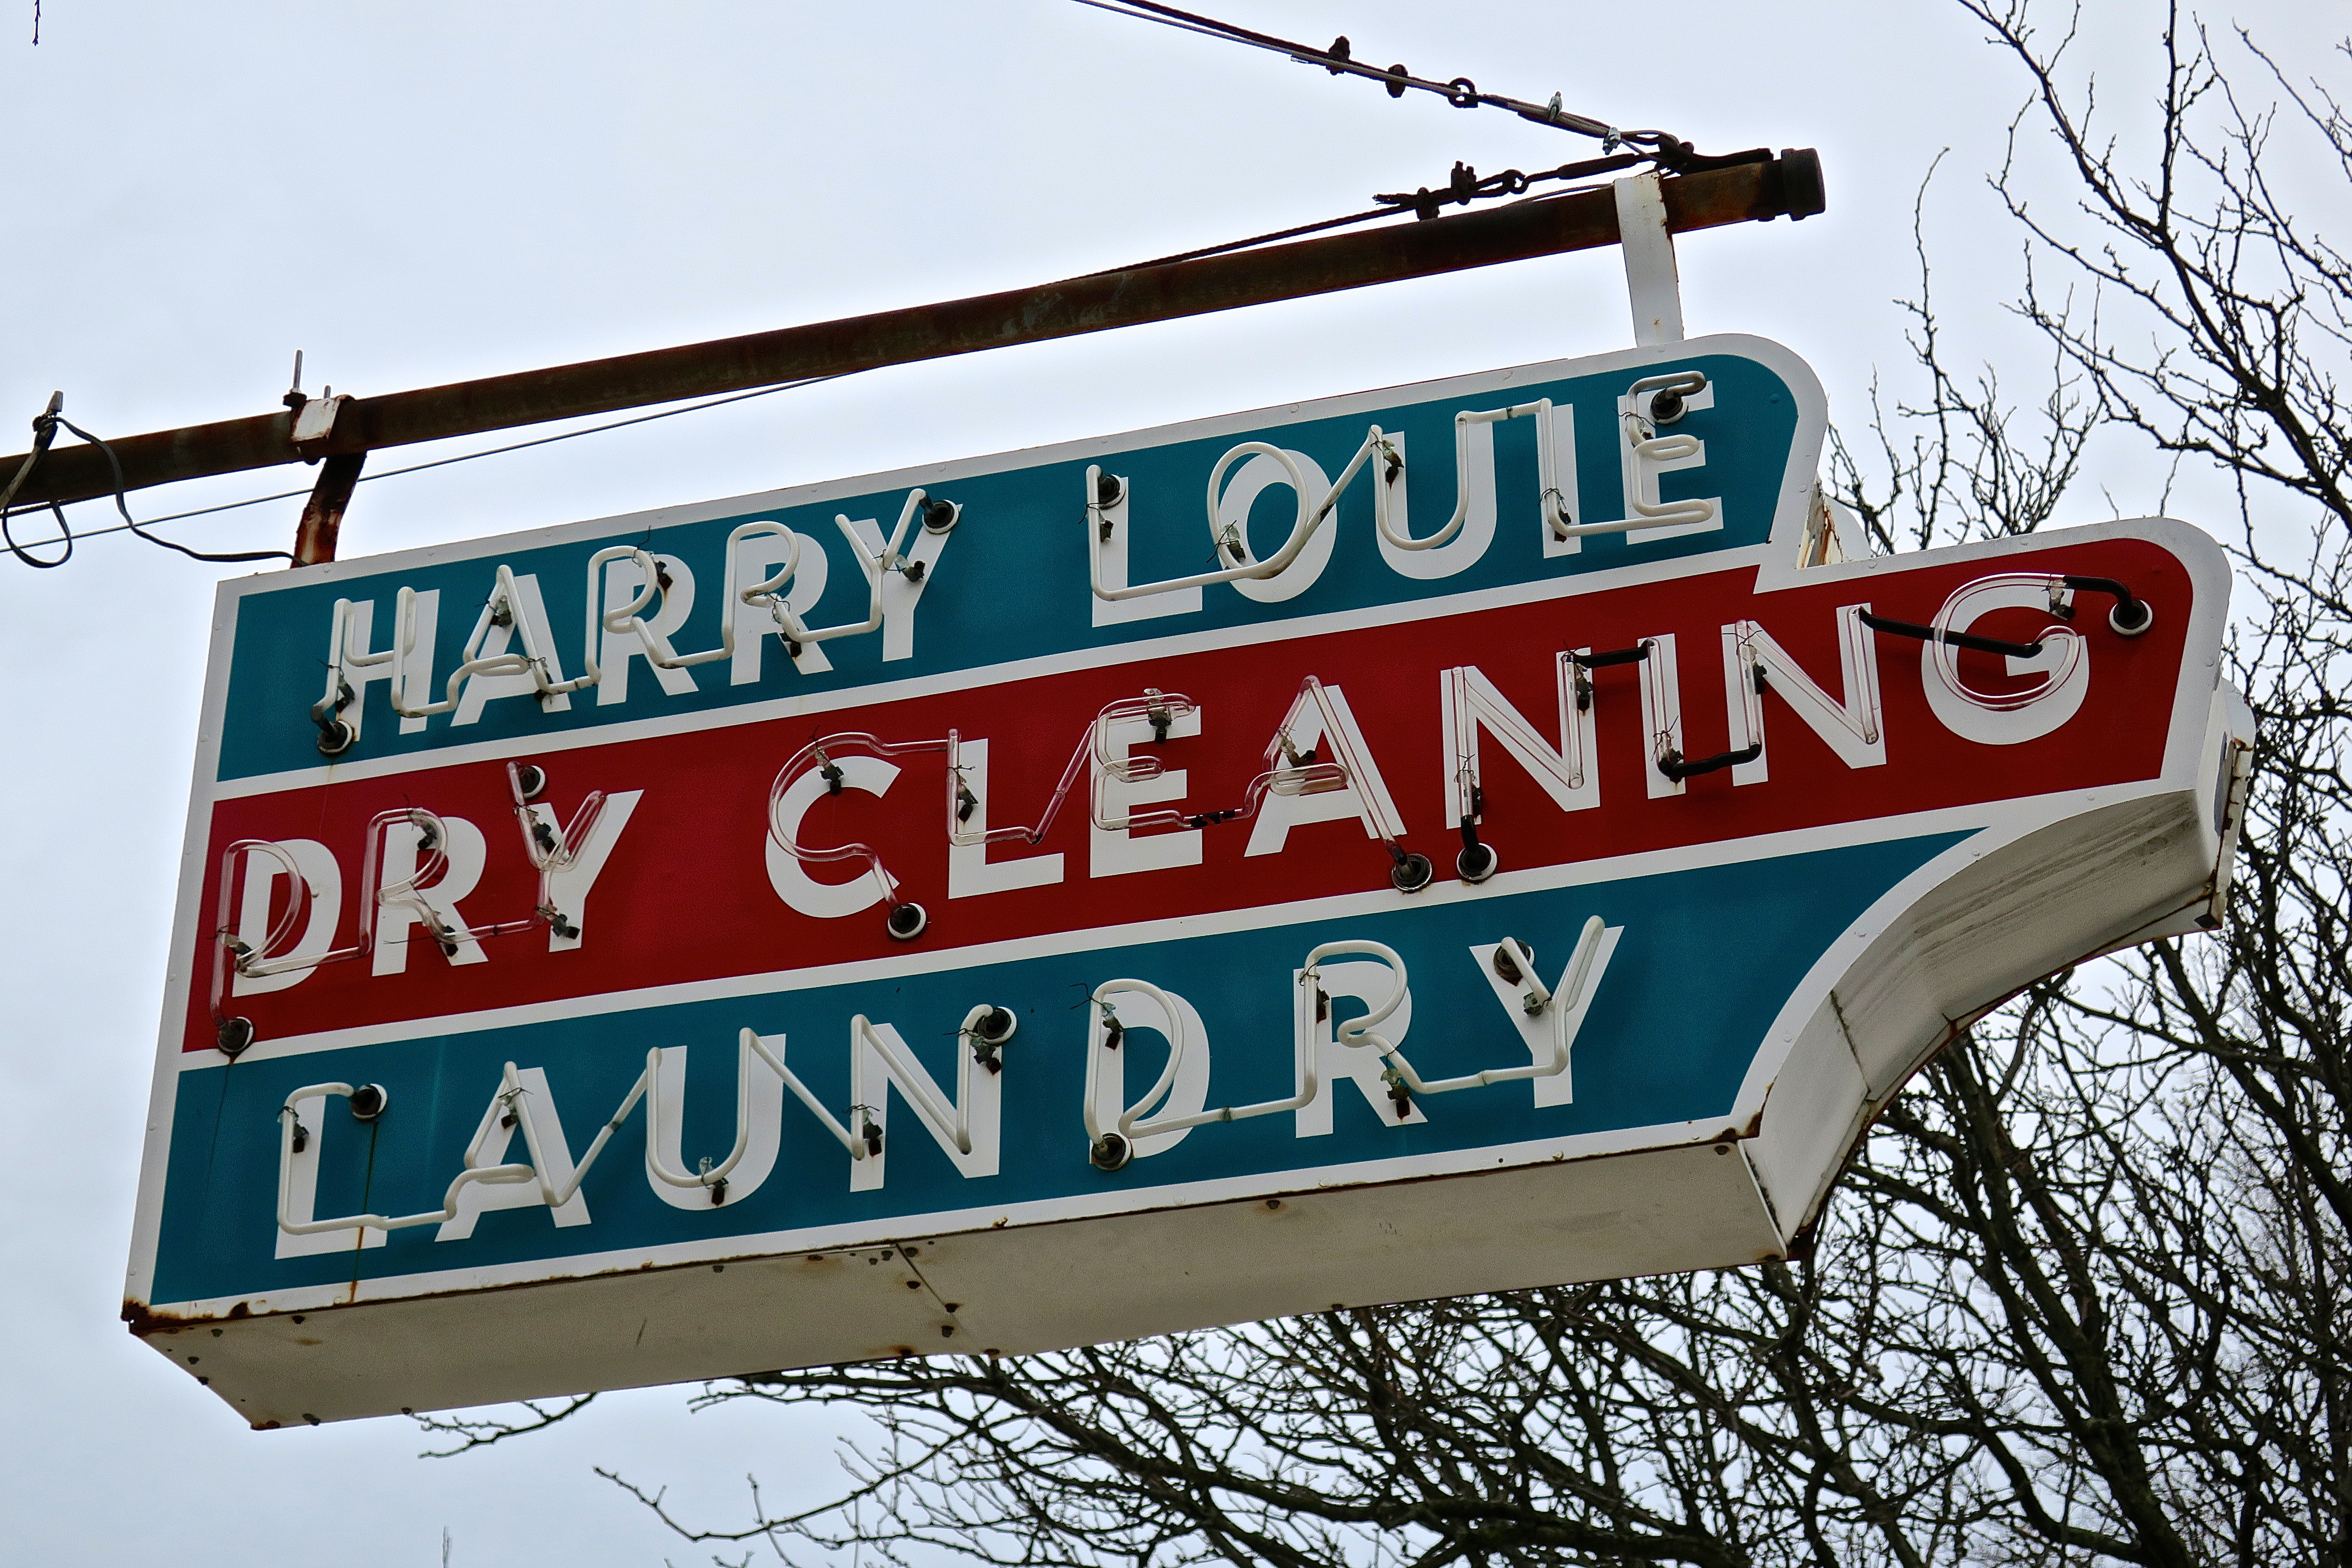 Harry Louis Laundry and Dry Cleaning - 129 South Governors Avenue, Dover, Delaware U.S.A. - April 5, 2017